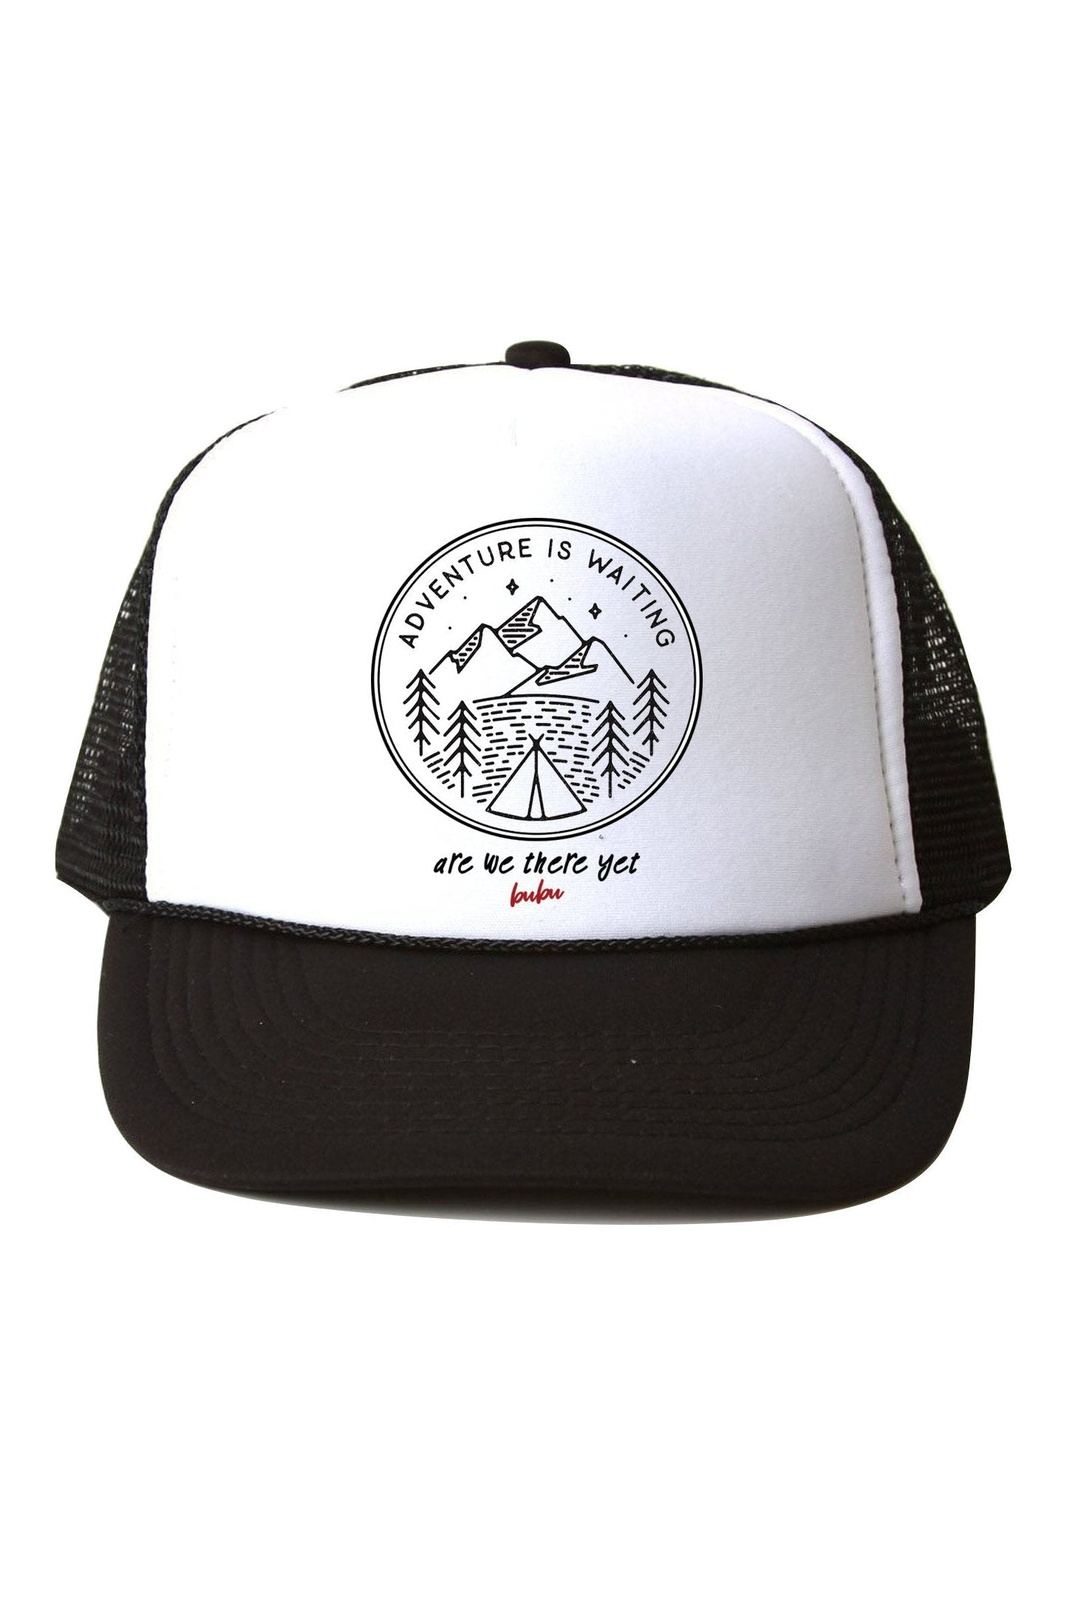 Adventure Is Waiting Trucker Hat - Tea for Three: A Children's Boutique-New Arrivals-Tea for Three: A Children's Boutique